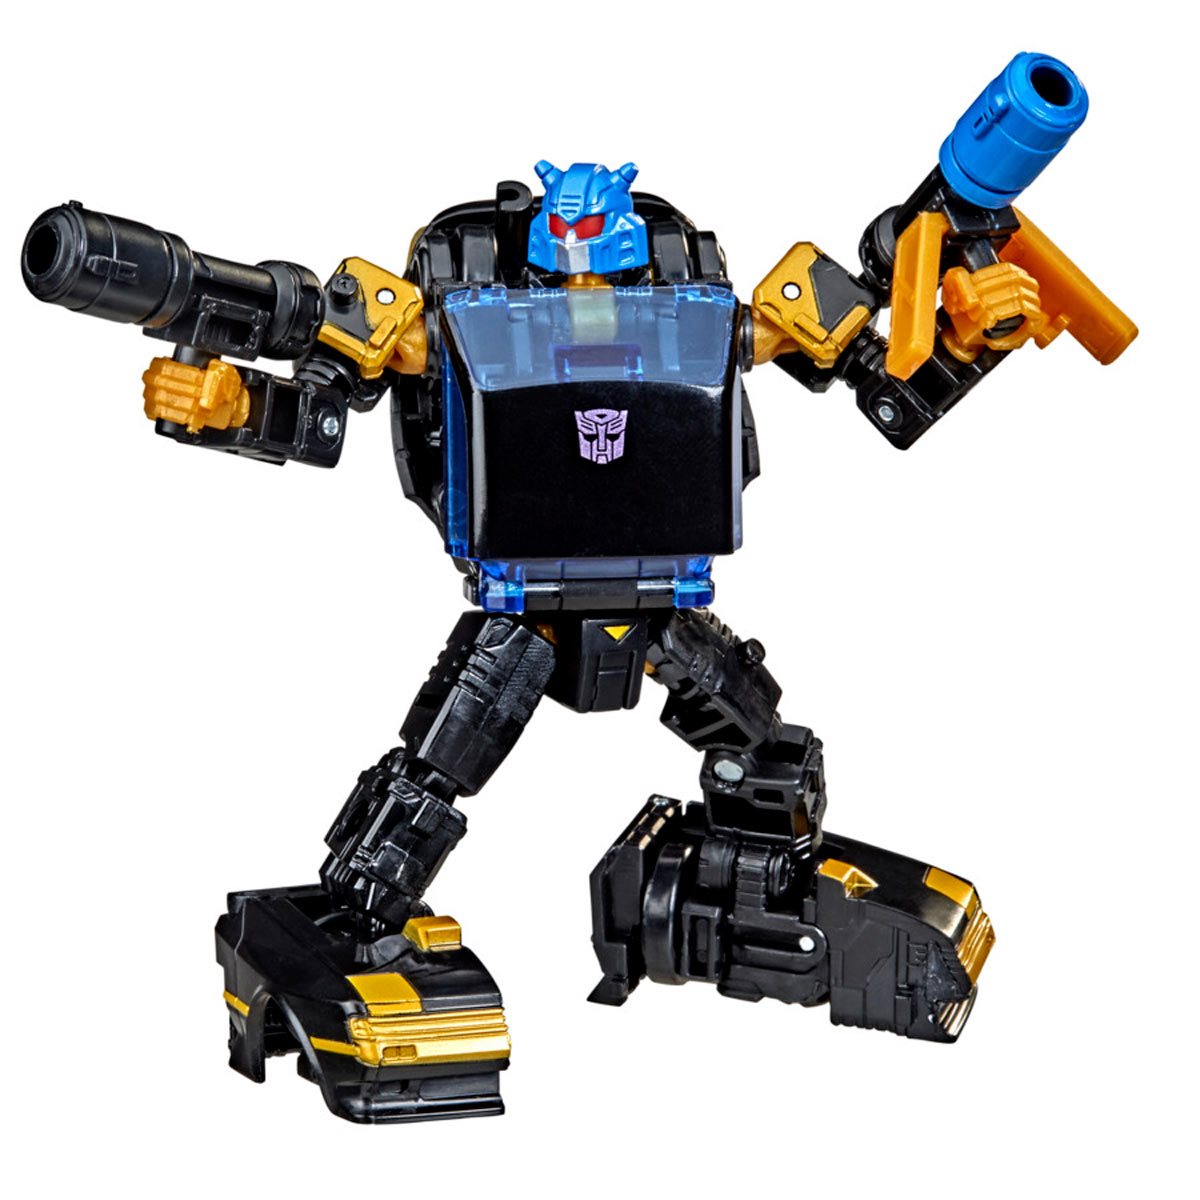 Transformers Generations Shattered Glass Collection Deluxe Class